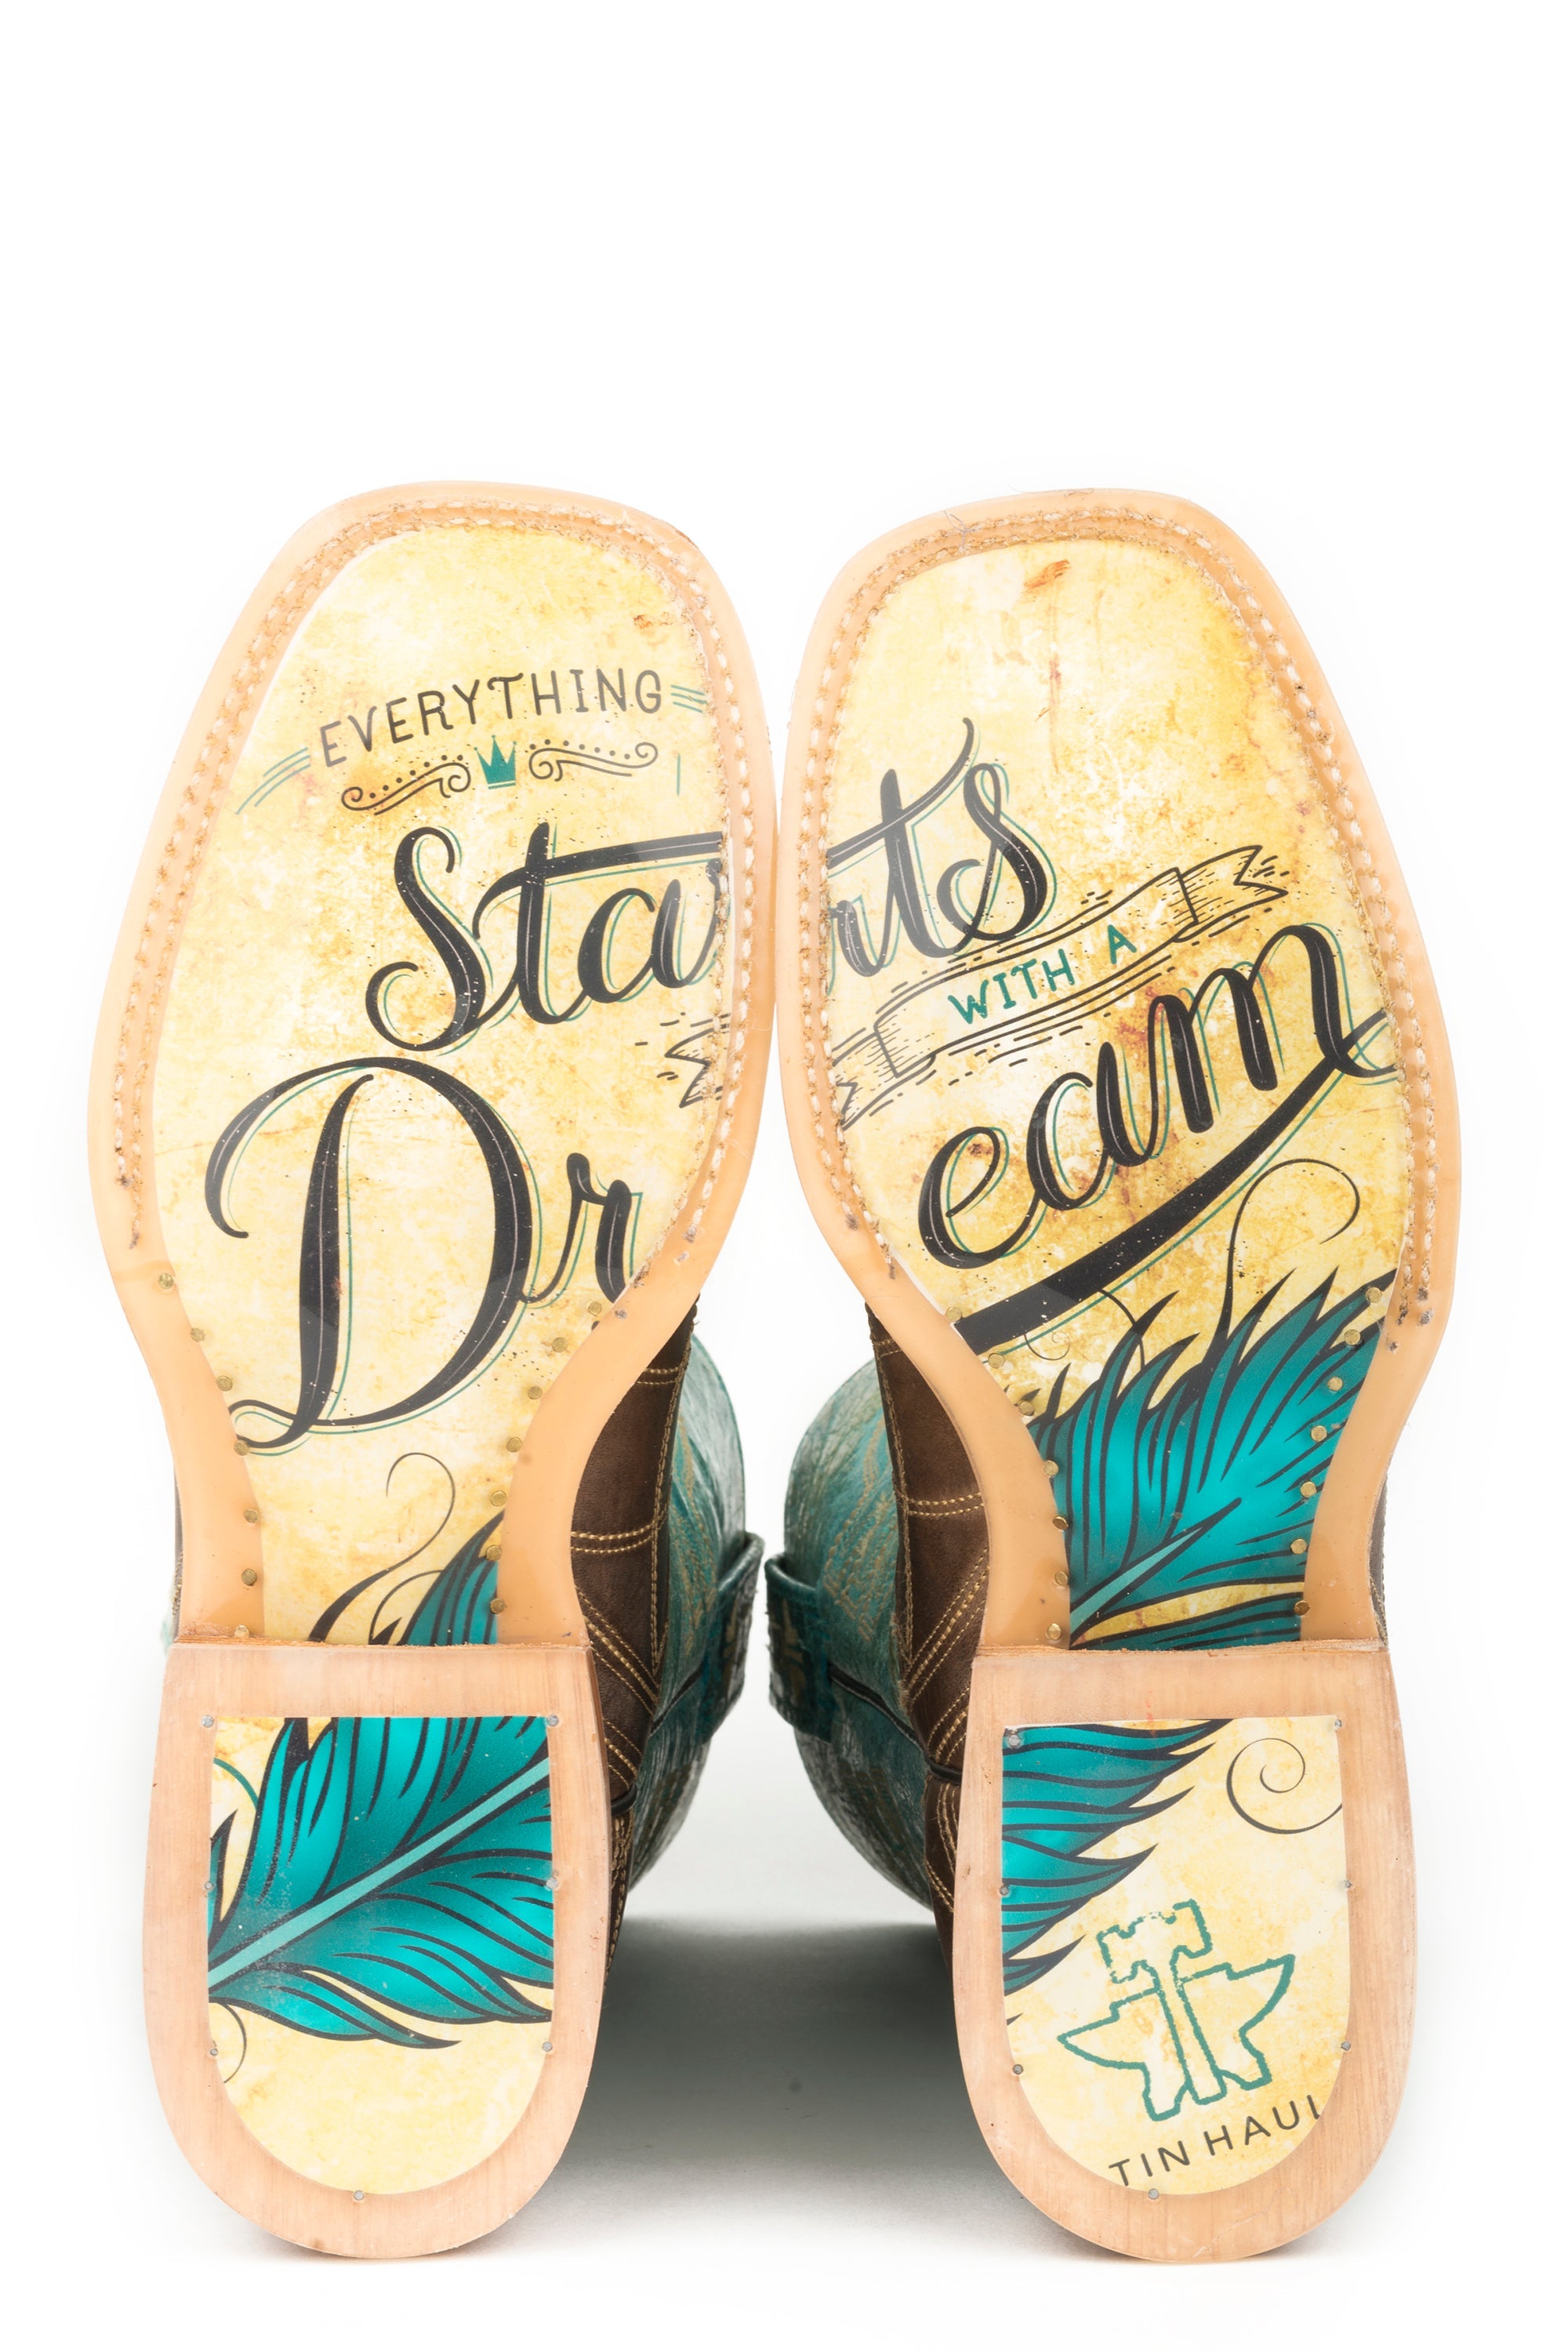 Tin Haul WOMENS DREAMCATCHER WITH START WITH A DREAM SOLE